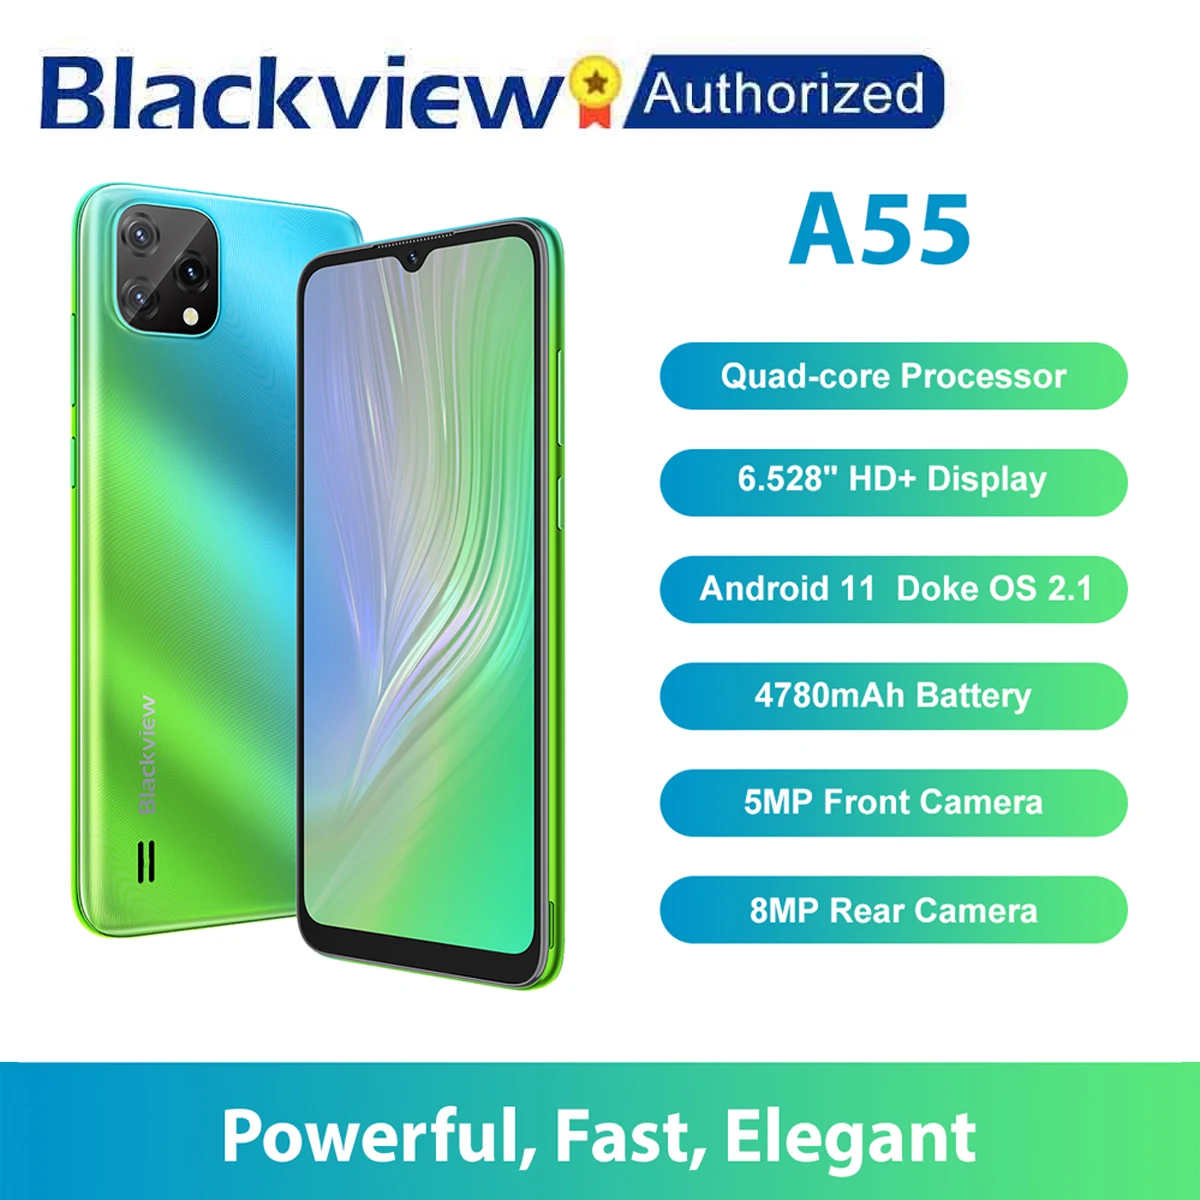 

Blackview A55 Smartphone 3GB RAM 16GB ROM 6.528" HD 4780mAh Quad Core Android 11 Mobile Phone MT6761V 5MP+8MP Camera Cell Phone